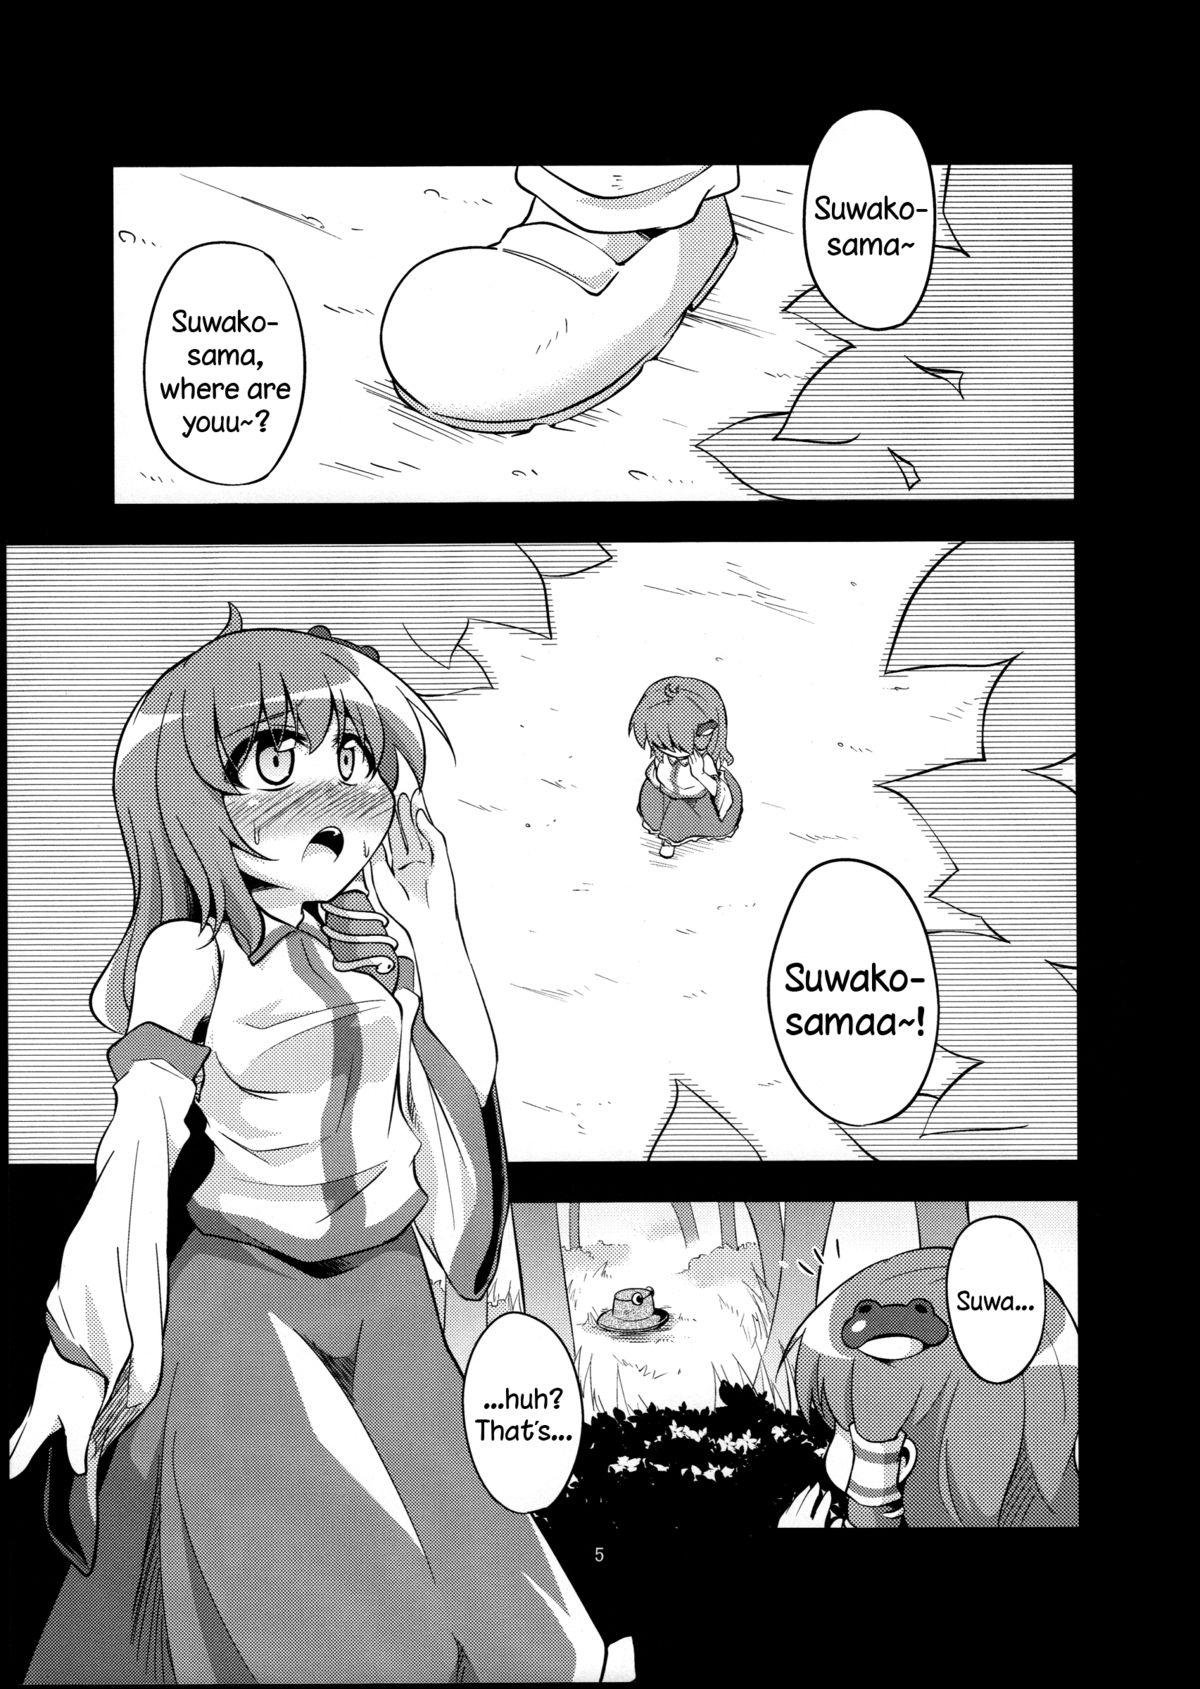 (Reitaisai 10) [Happiness Milk (Obyaa)] Nikuyokugami Gyoushin - tentacle and hermaphrodite and two girls - | Faith in the God of Carnal Desire - Tentacle and Hermaphrodite and Two Girls (Touhou Project) [English] {Sharpie Translations} 2